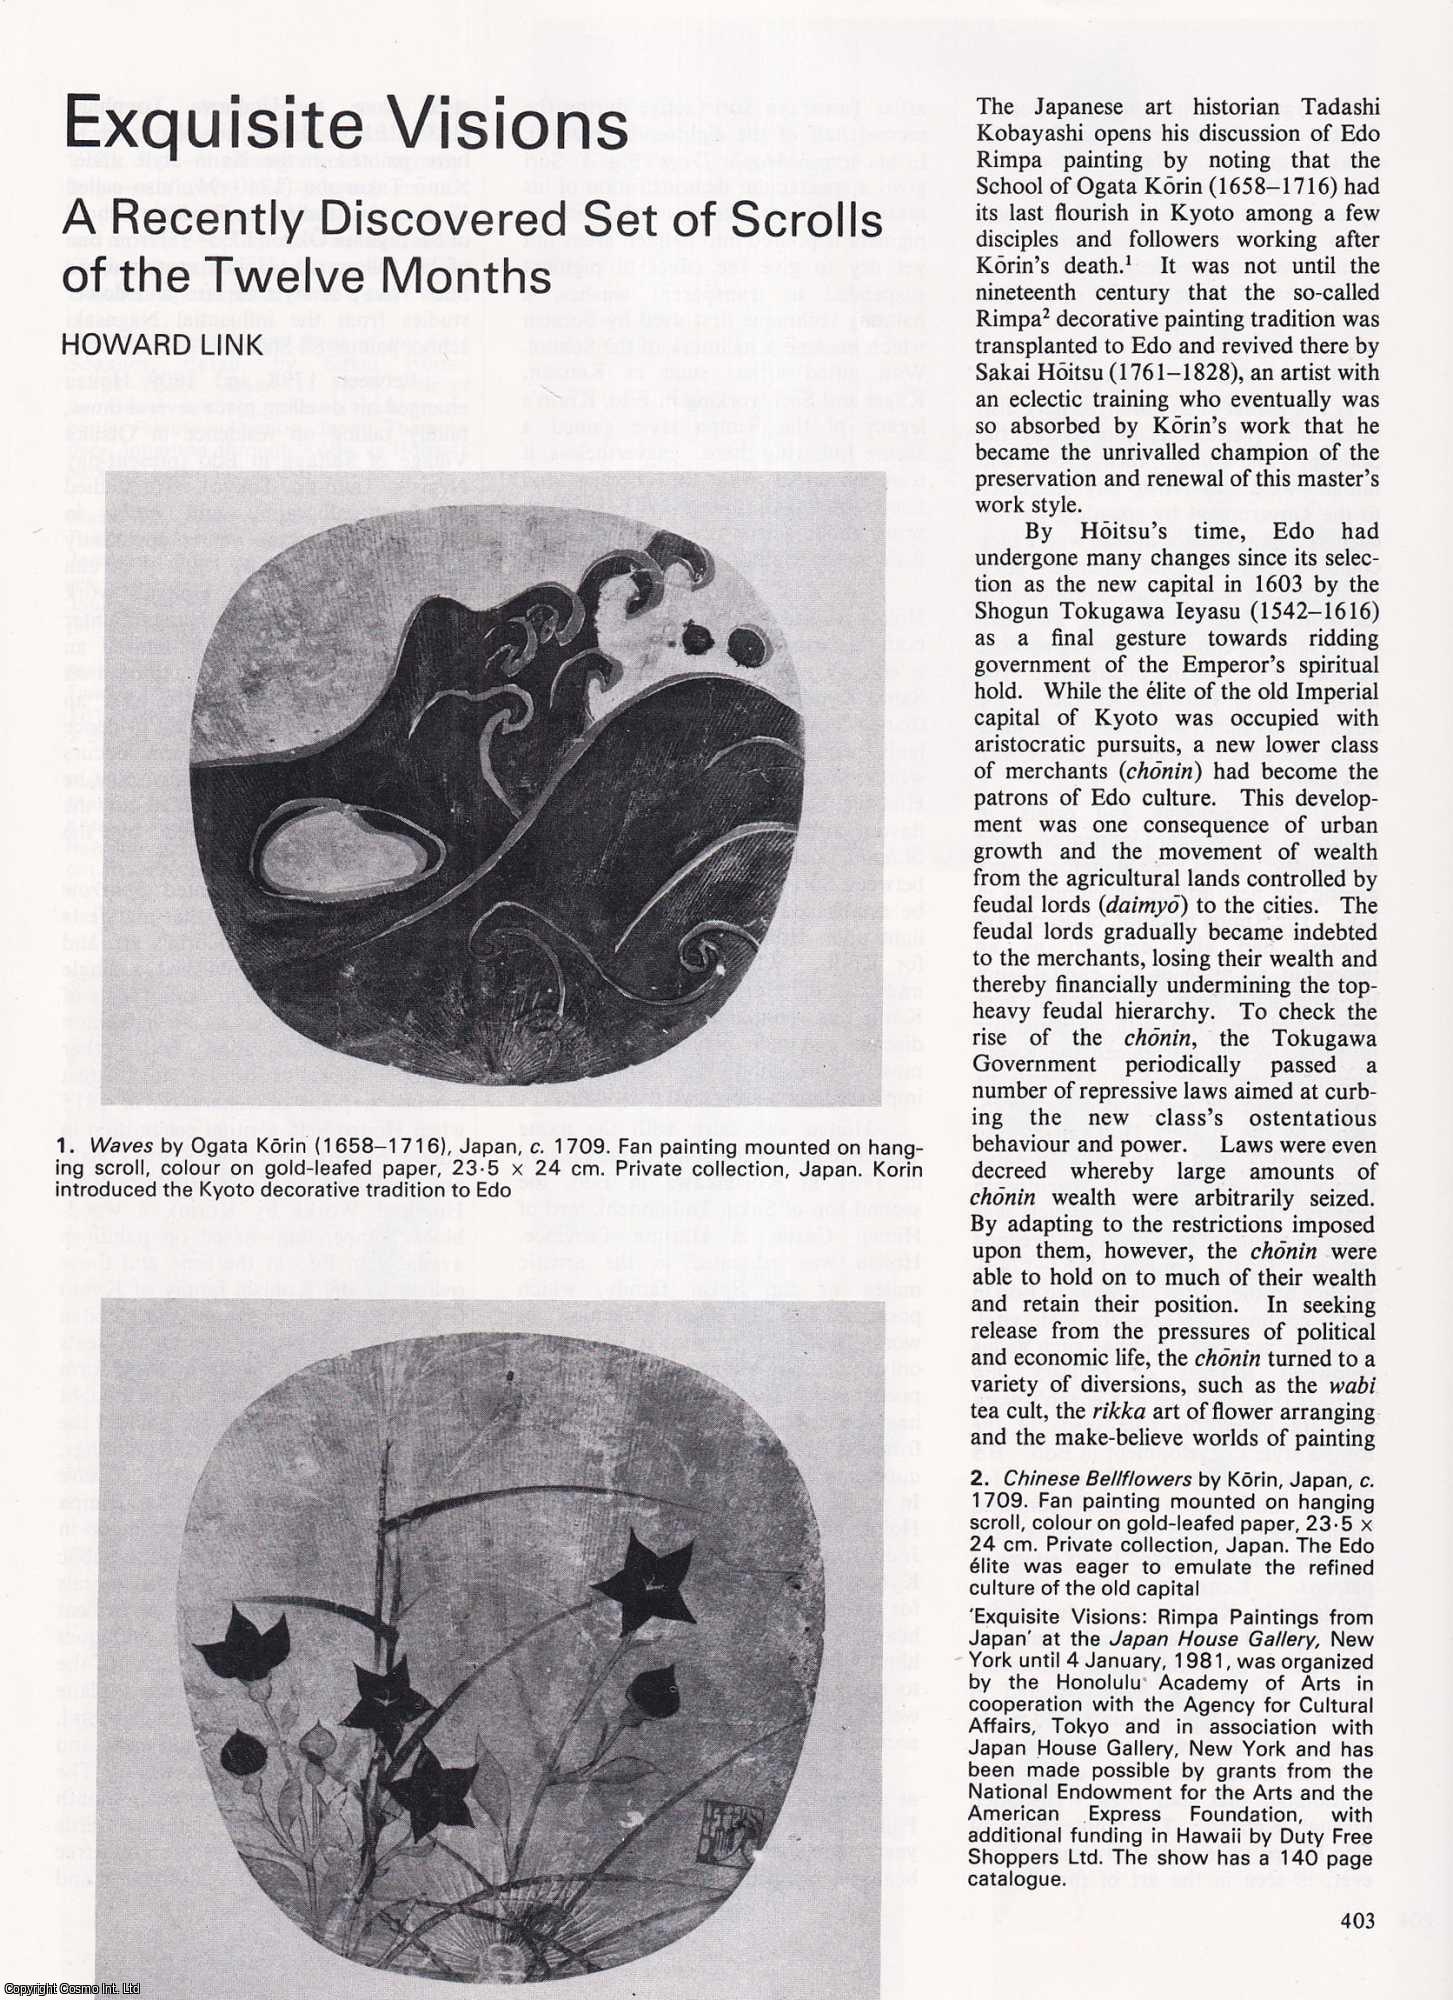 Howard Link - A Recently Discovered Set of Scrolls of the Twelve Months. An original article from Apollo, International Magazine of the Arts, 1980.